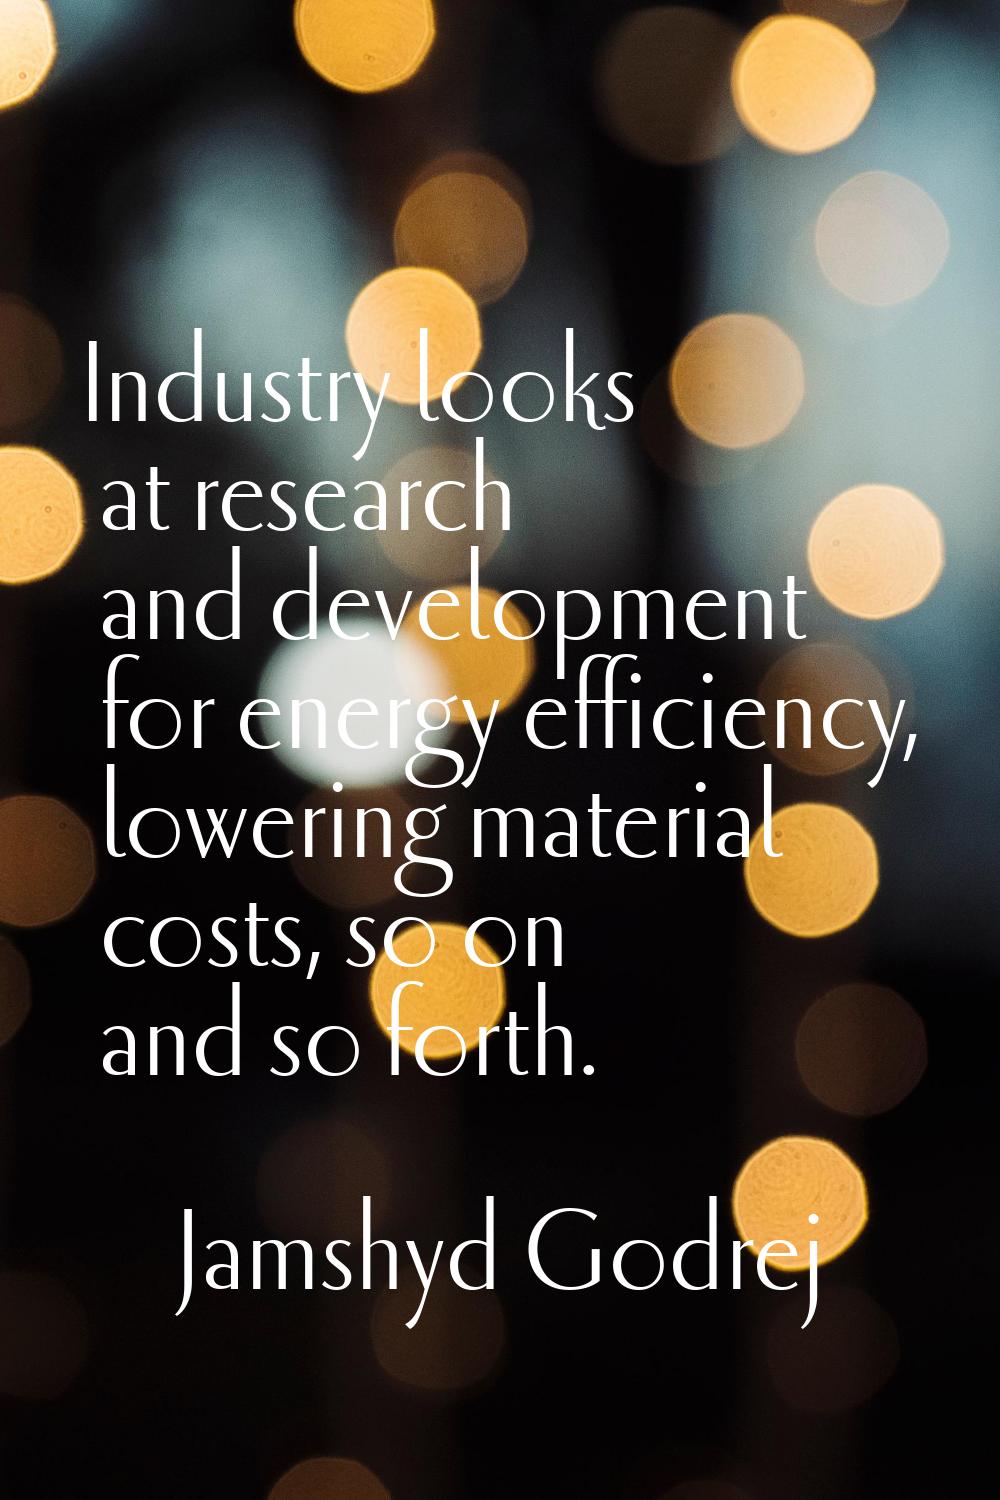 Industry looks at research and development for energy efficiency, lowering material costs, so on an